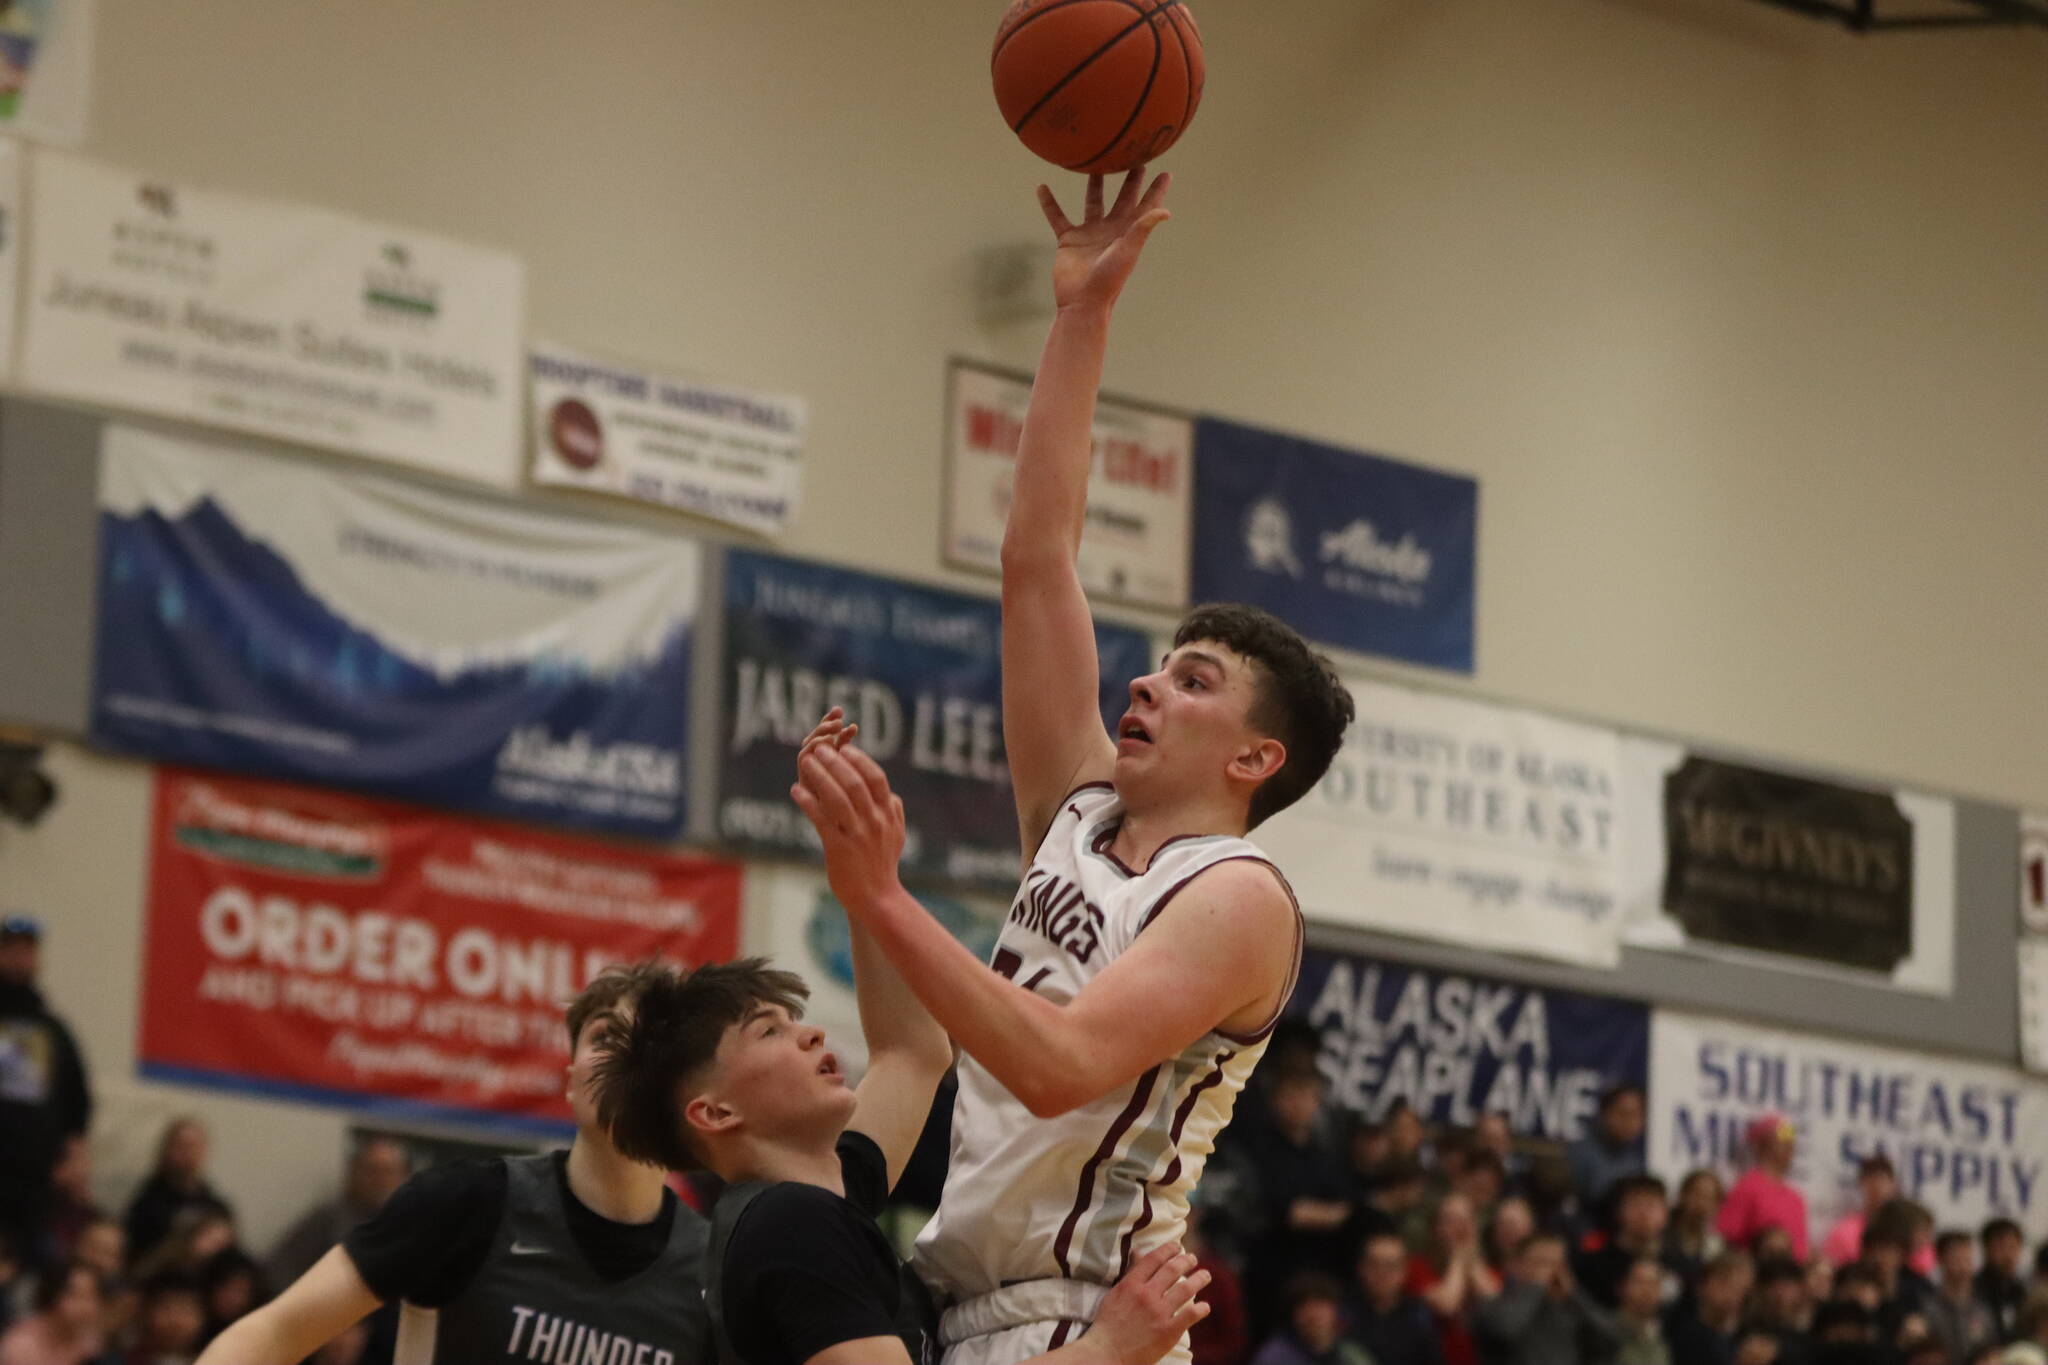 Ketchikan High School’s Marcus Stockhausen takes the ball in for a layup against Thunder Mountain for their final match up in this year’s 4A Region V tournament. Ketchikan advances to play JDHS Friday night for the championship game. (Jonson Kuhn / Juneau Empire)